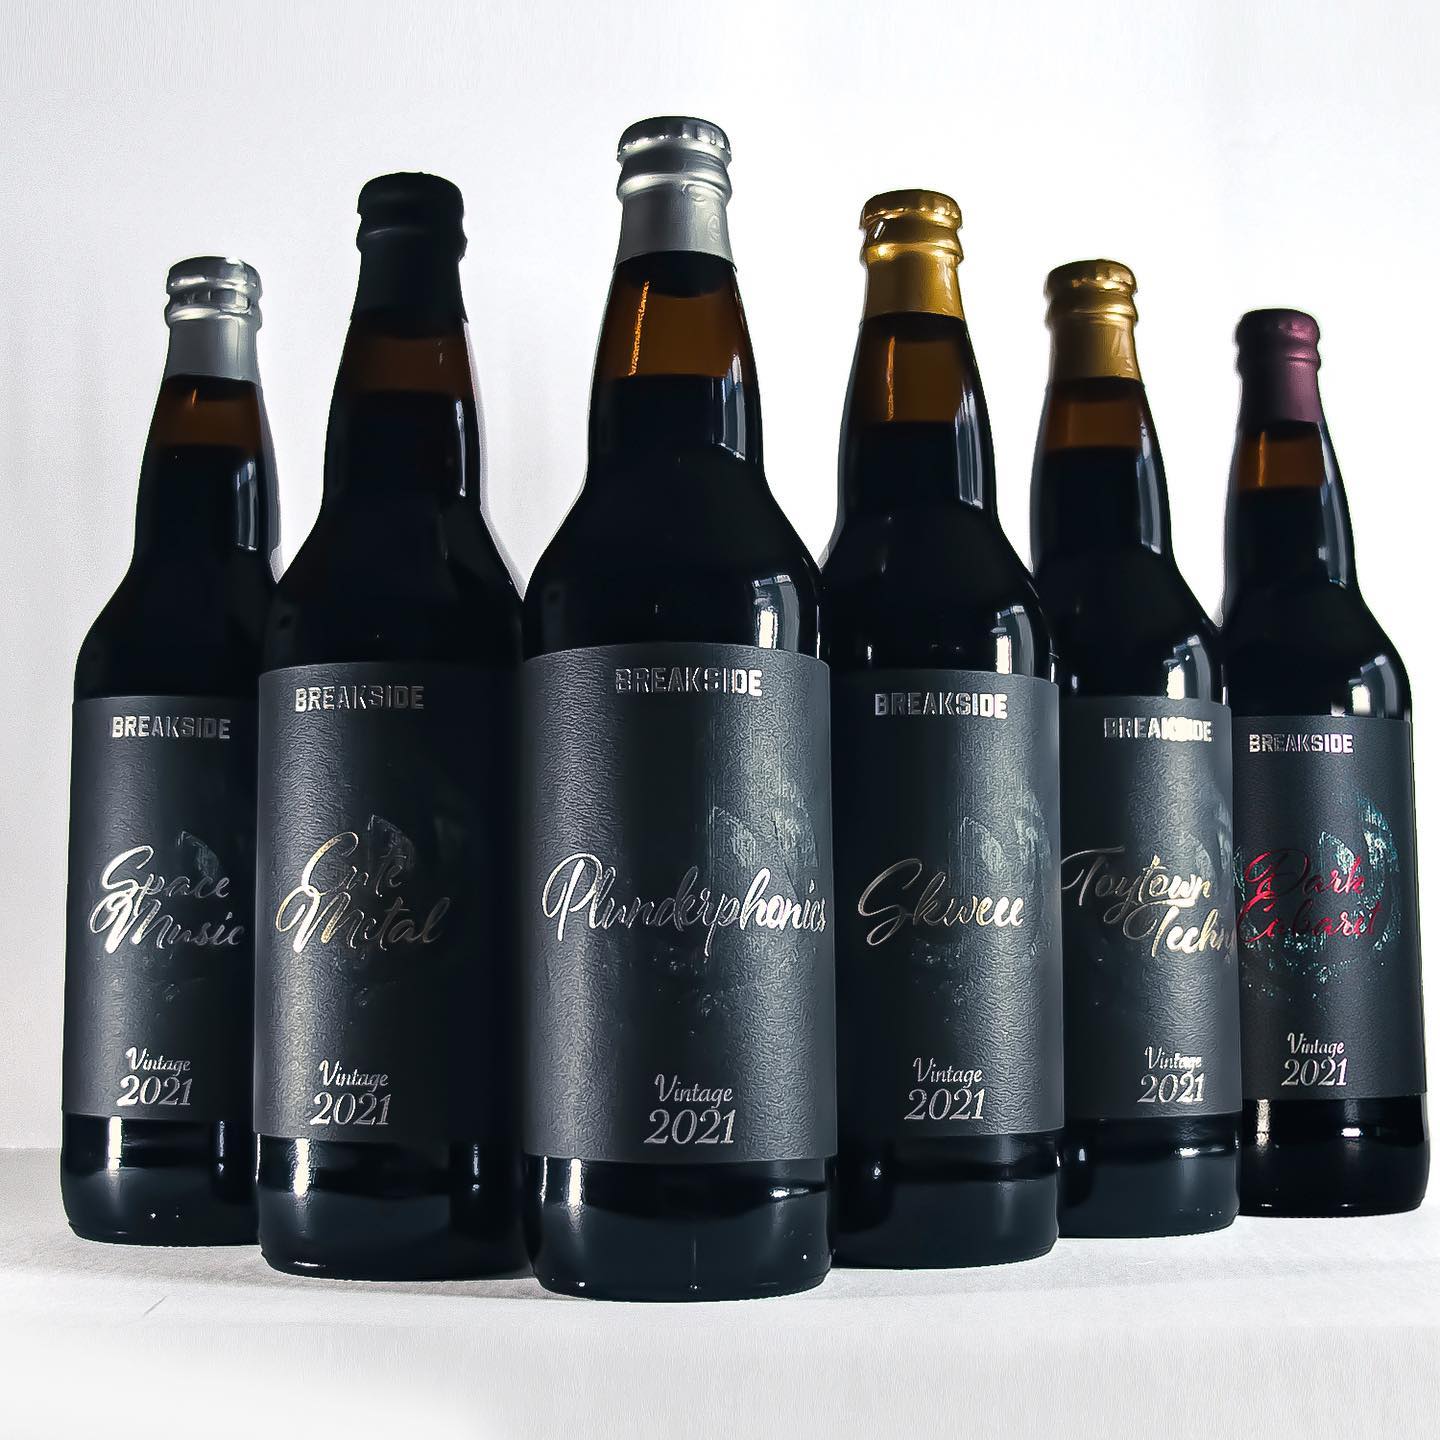 The 2021 Barrel-Aged lineup from Breakside Brewery.